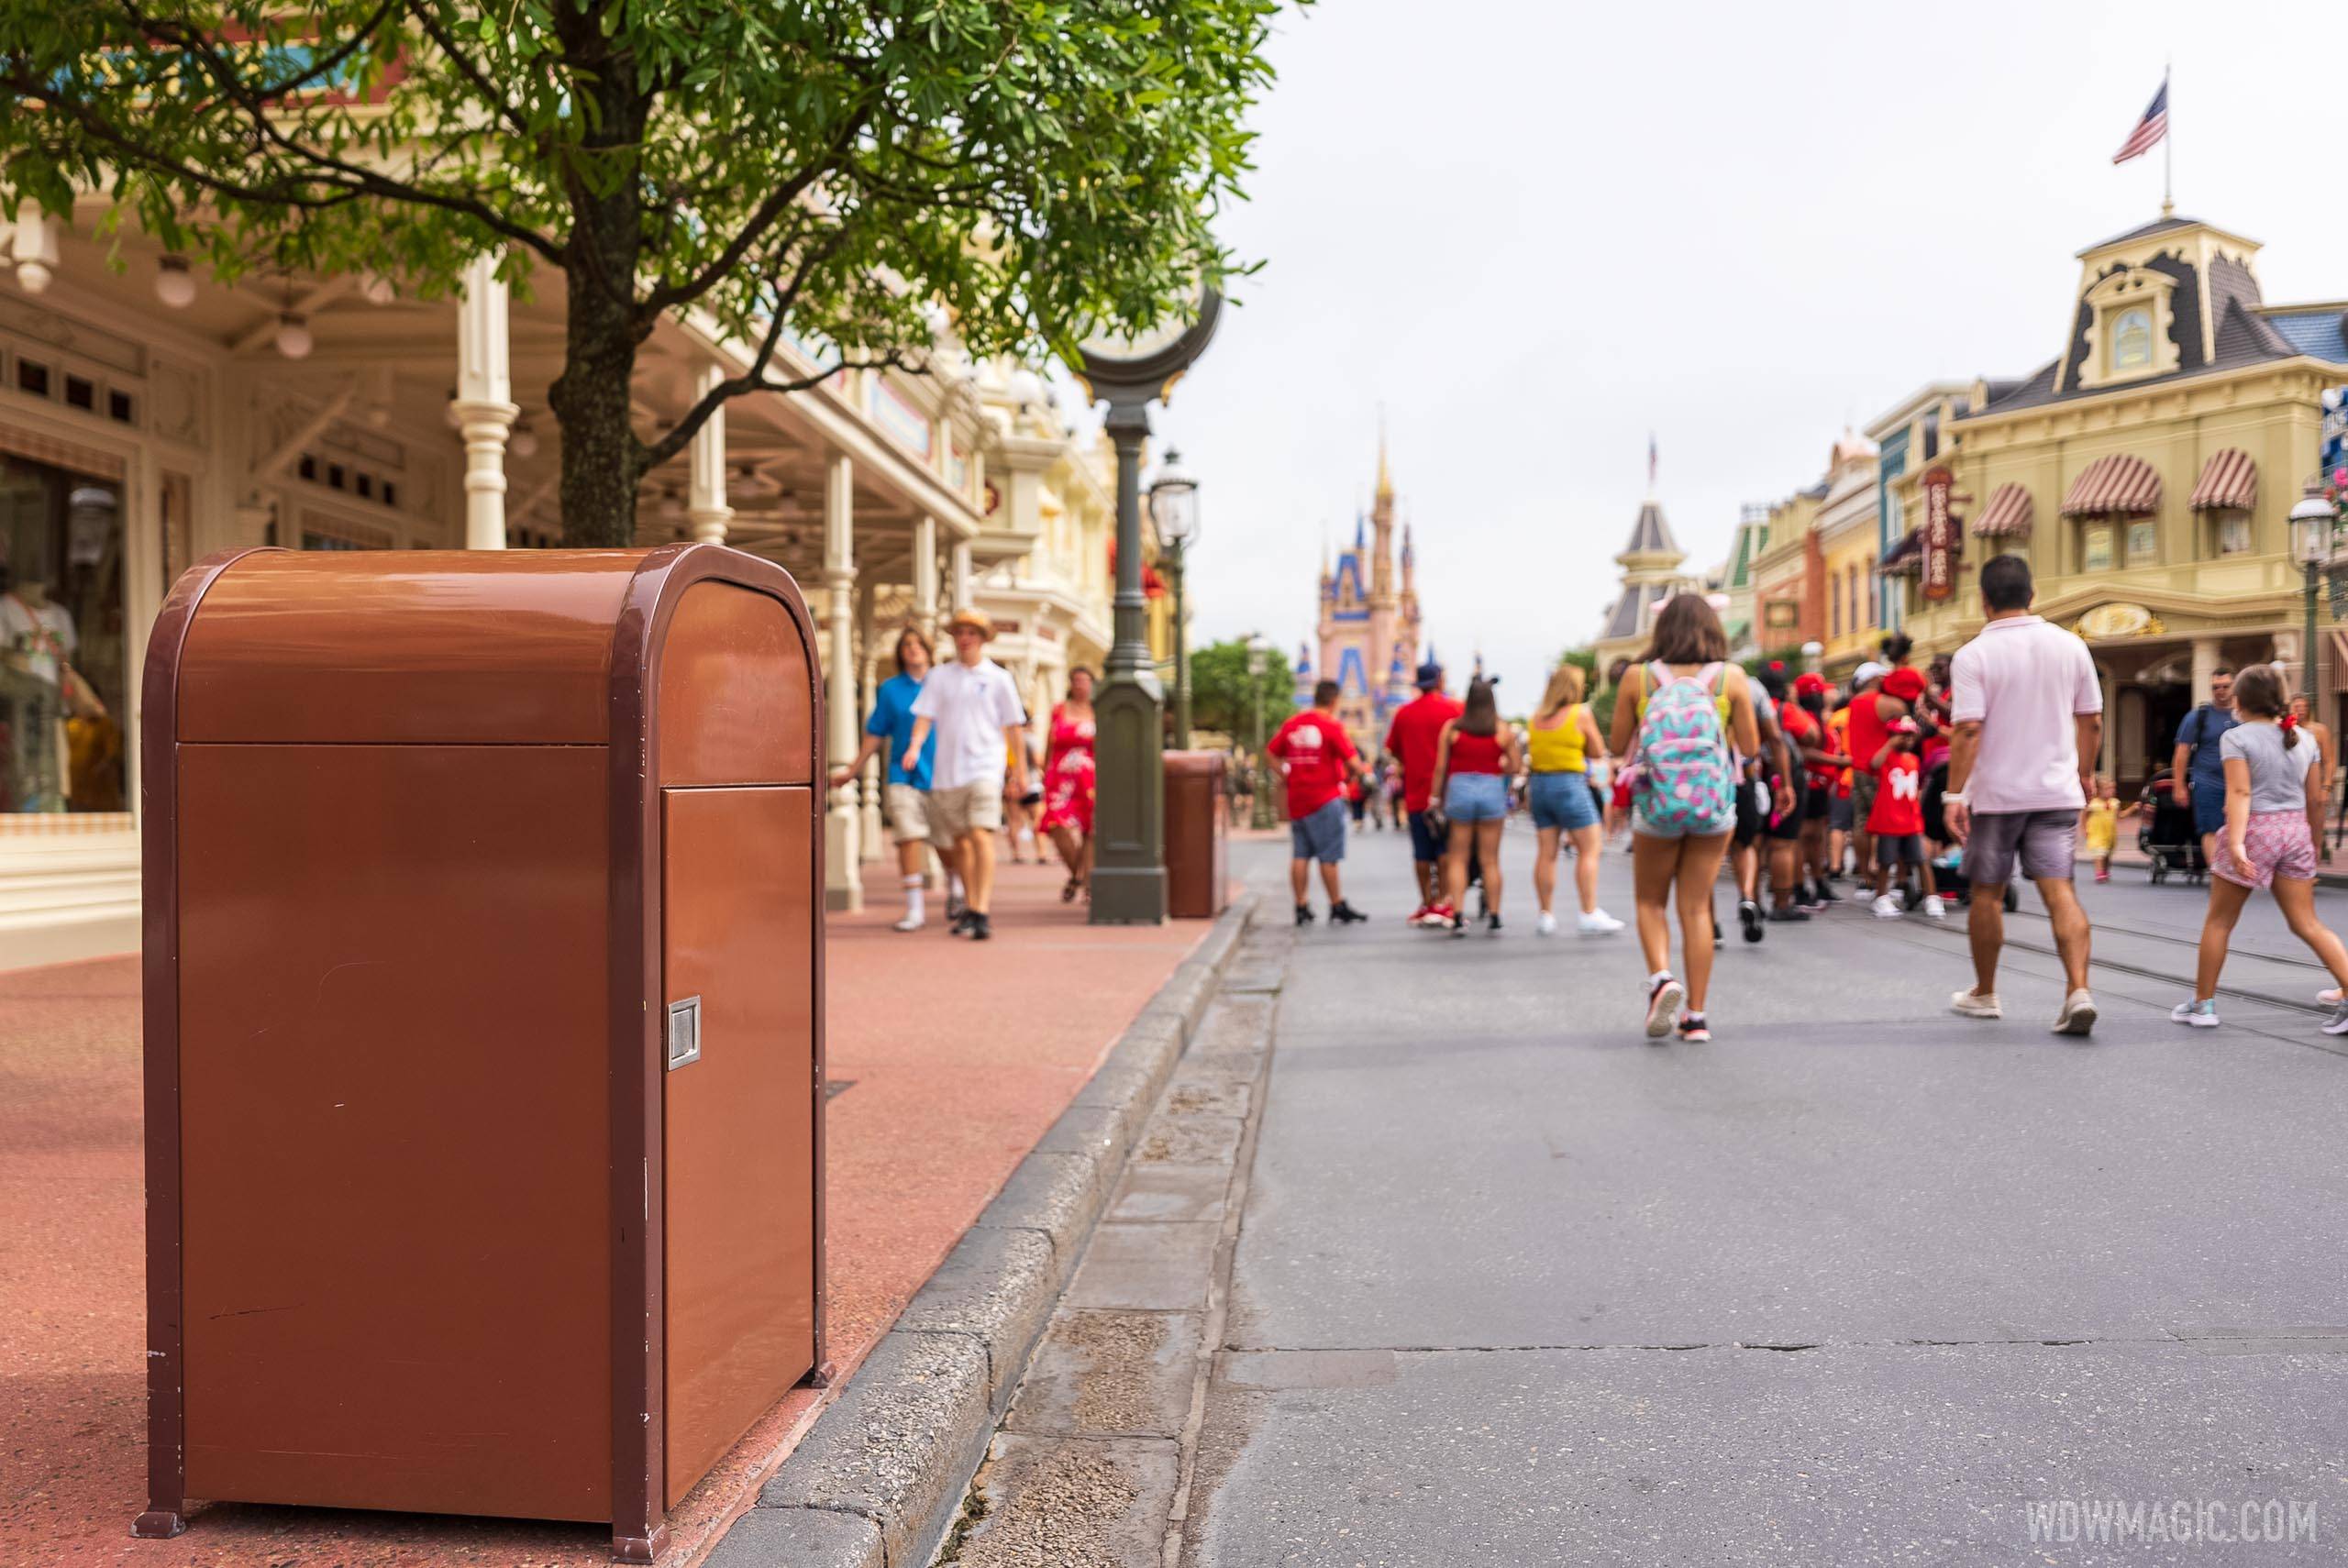 Disney removes more physical distancing and masks signage from Magic Kingdom